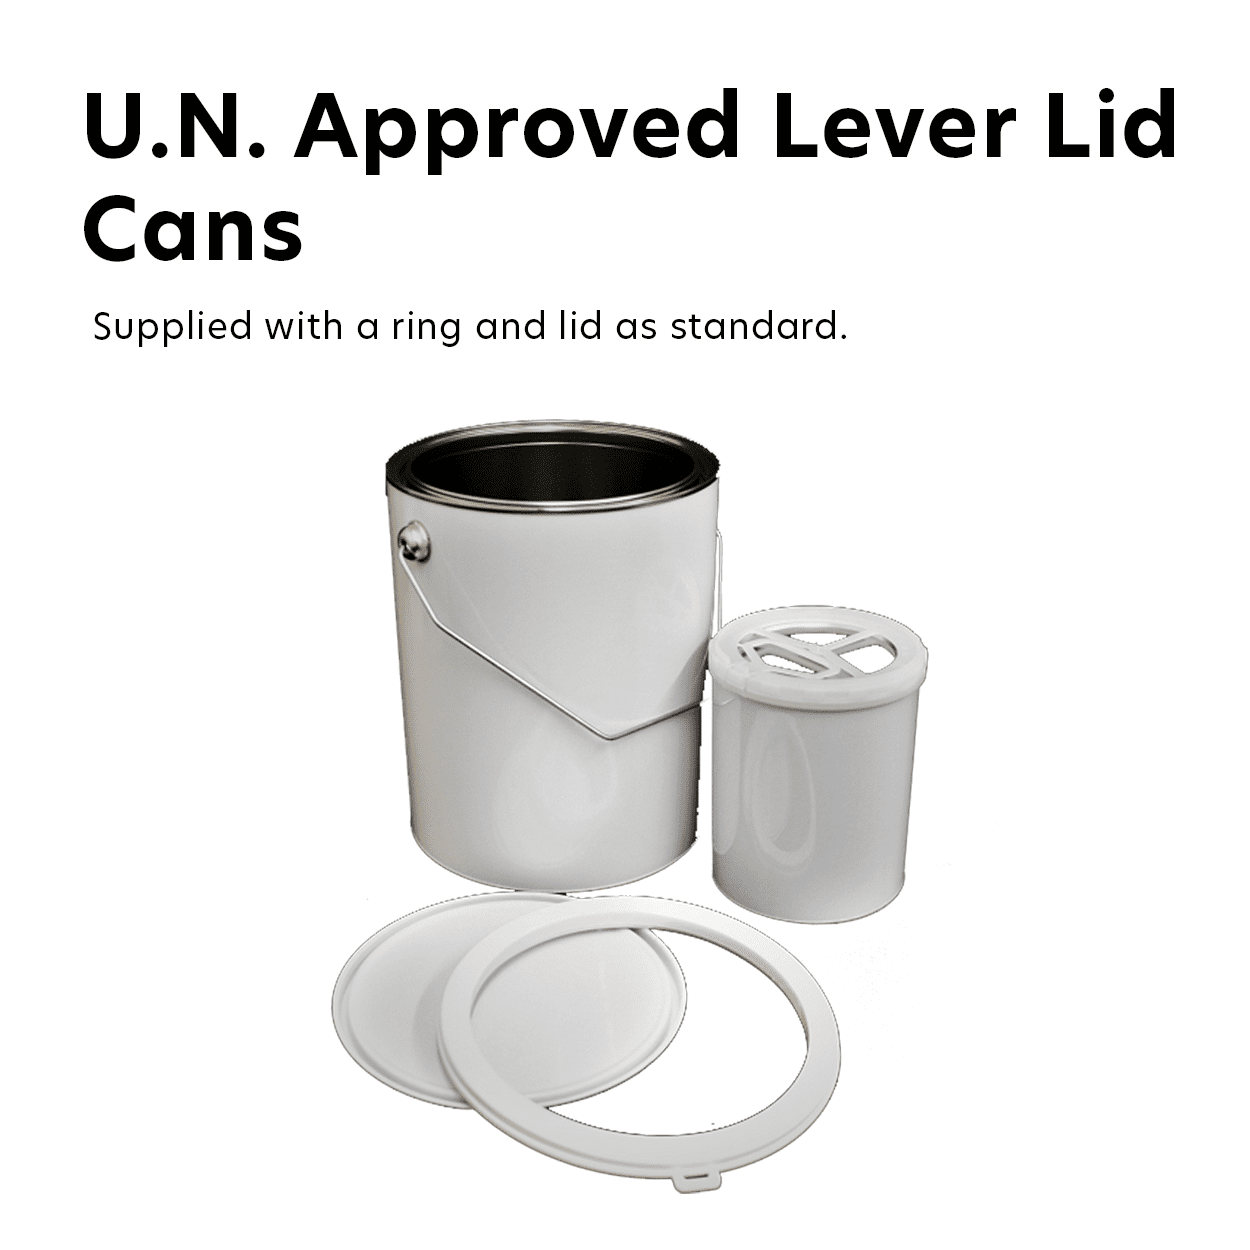 U.N. Approved Lever Lid Cans